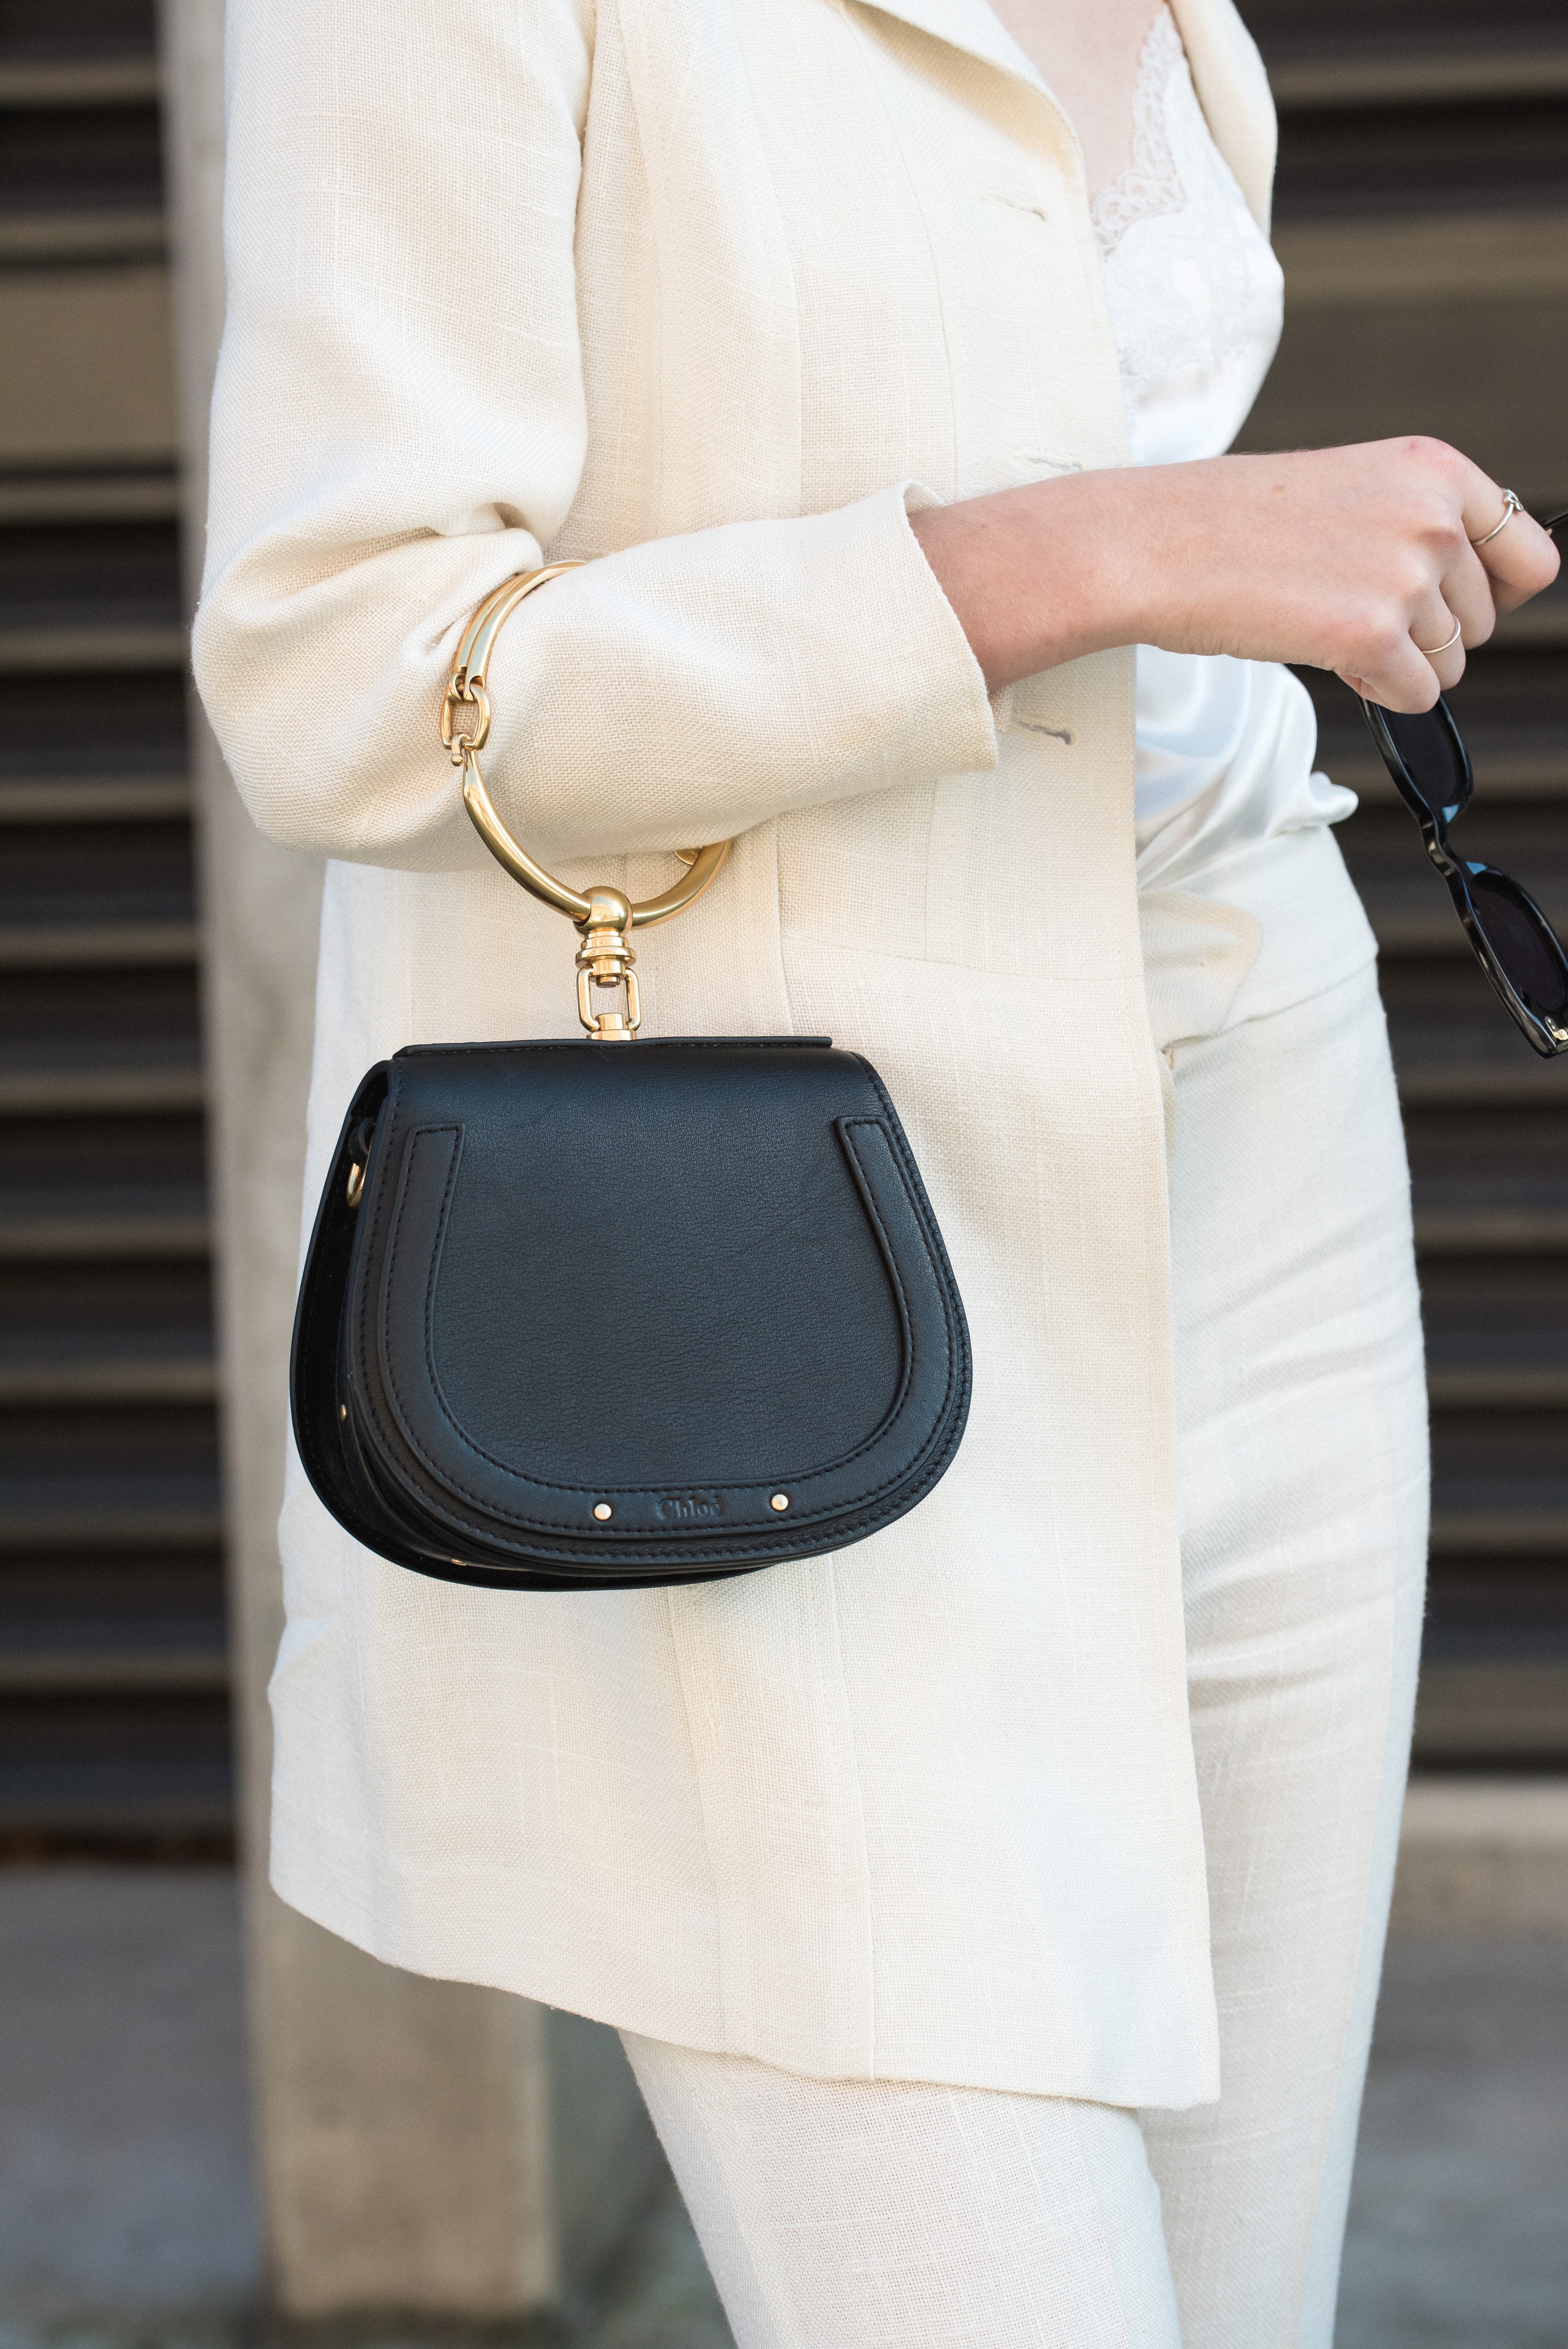 Read This Guide if You Have No Idea Where to Start on Buying a New Handbag